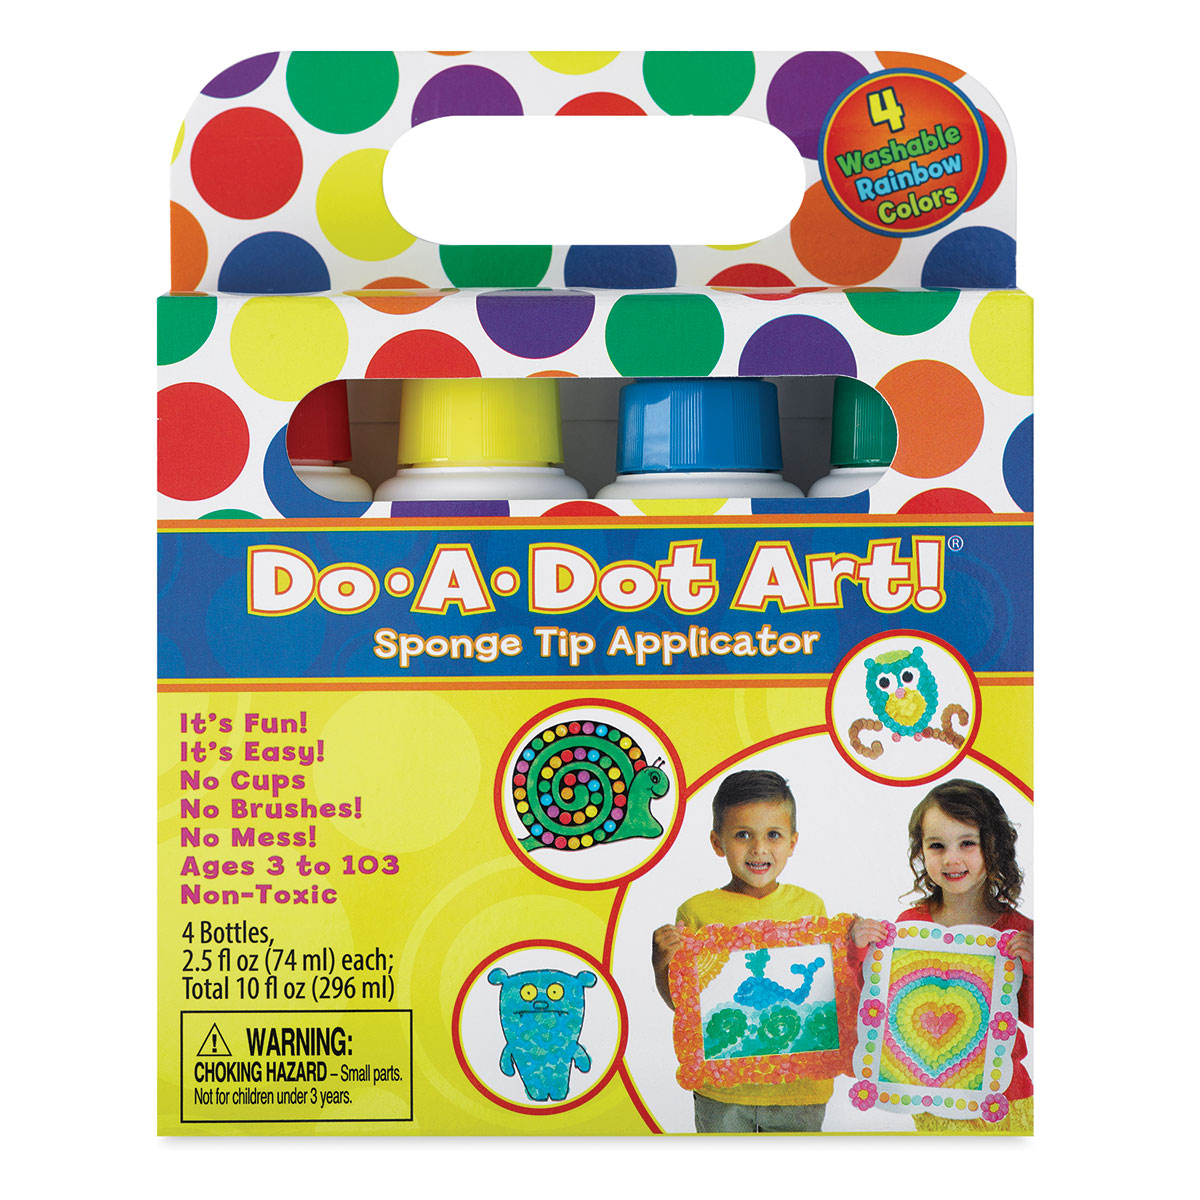 DIMENSIONS Colorful Rainbow Acrylic Dot Painting Kit for Adults and Kids,  Finished Project 5 x 7, Multicolor 8 Piece